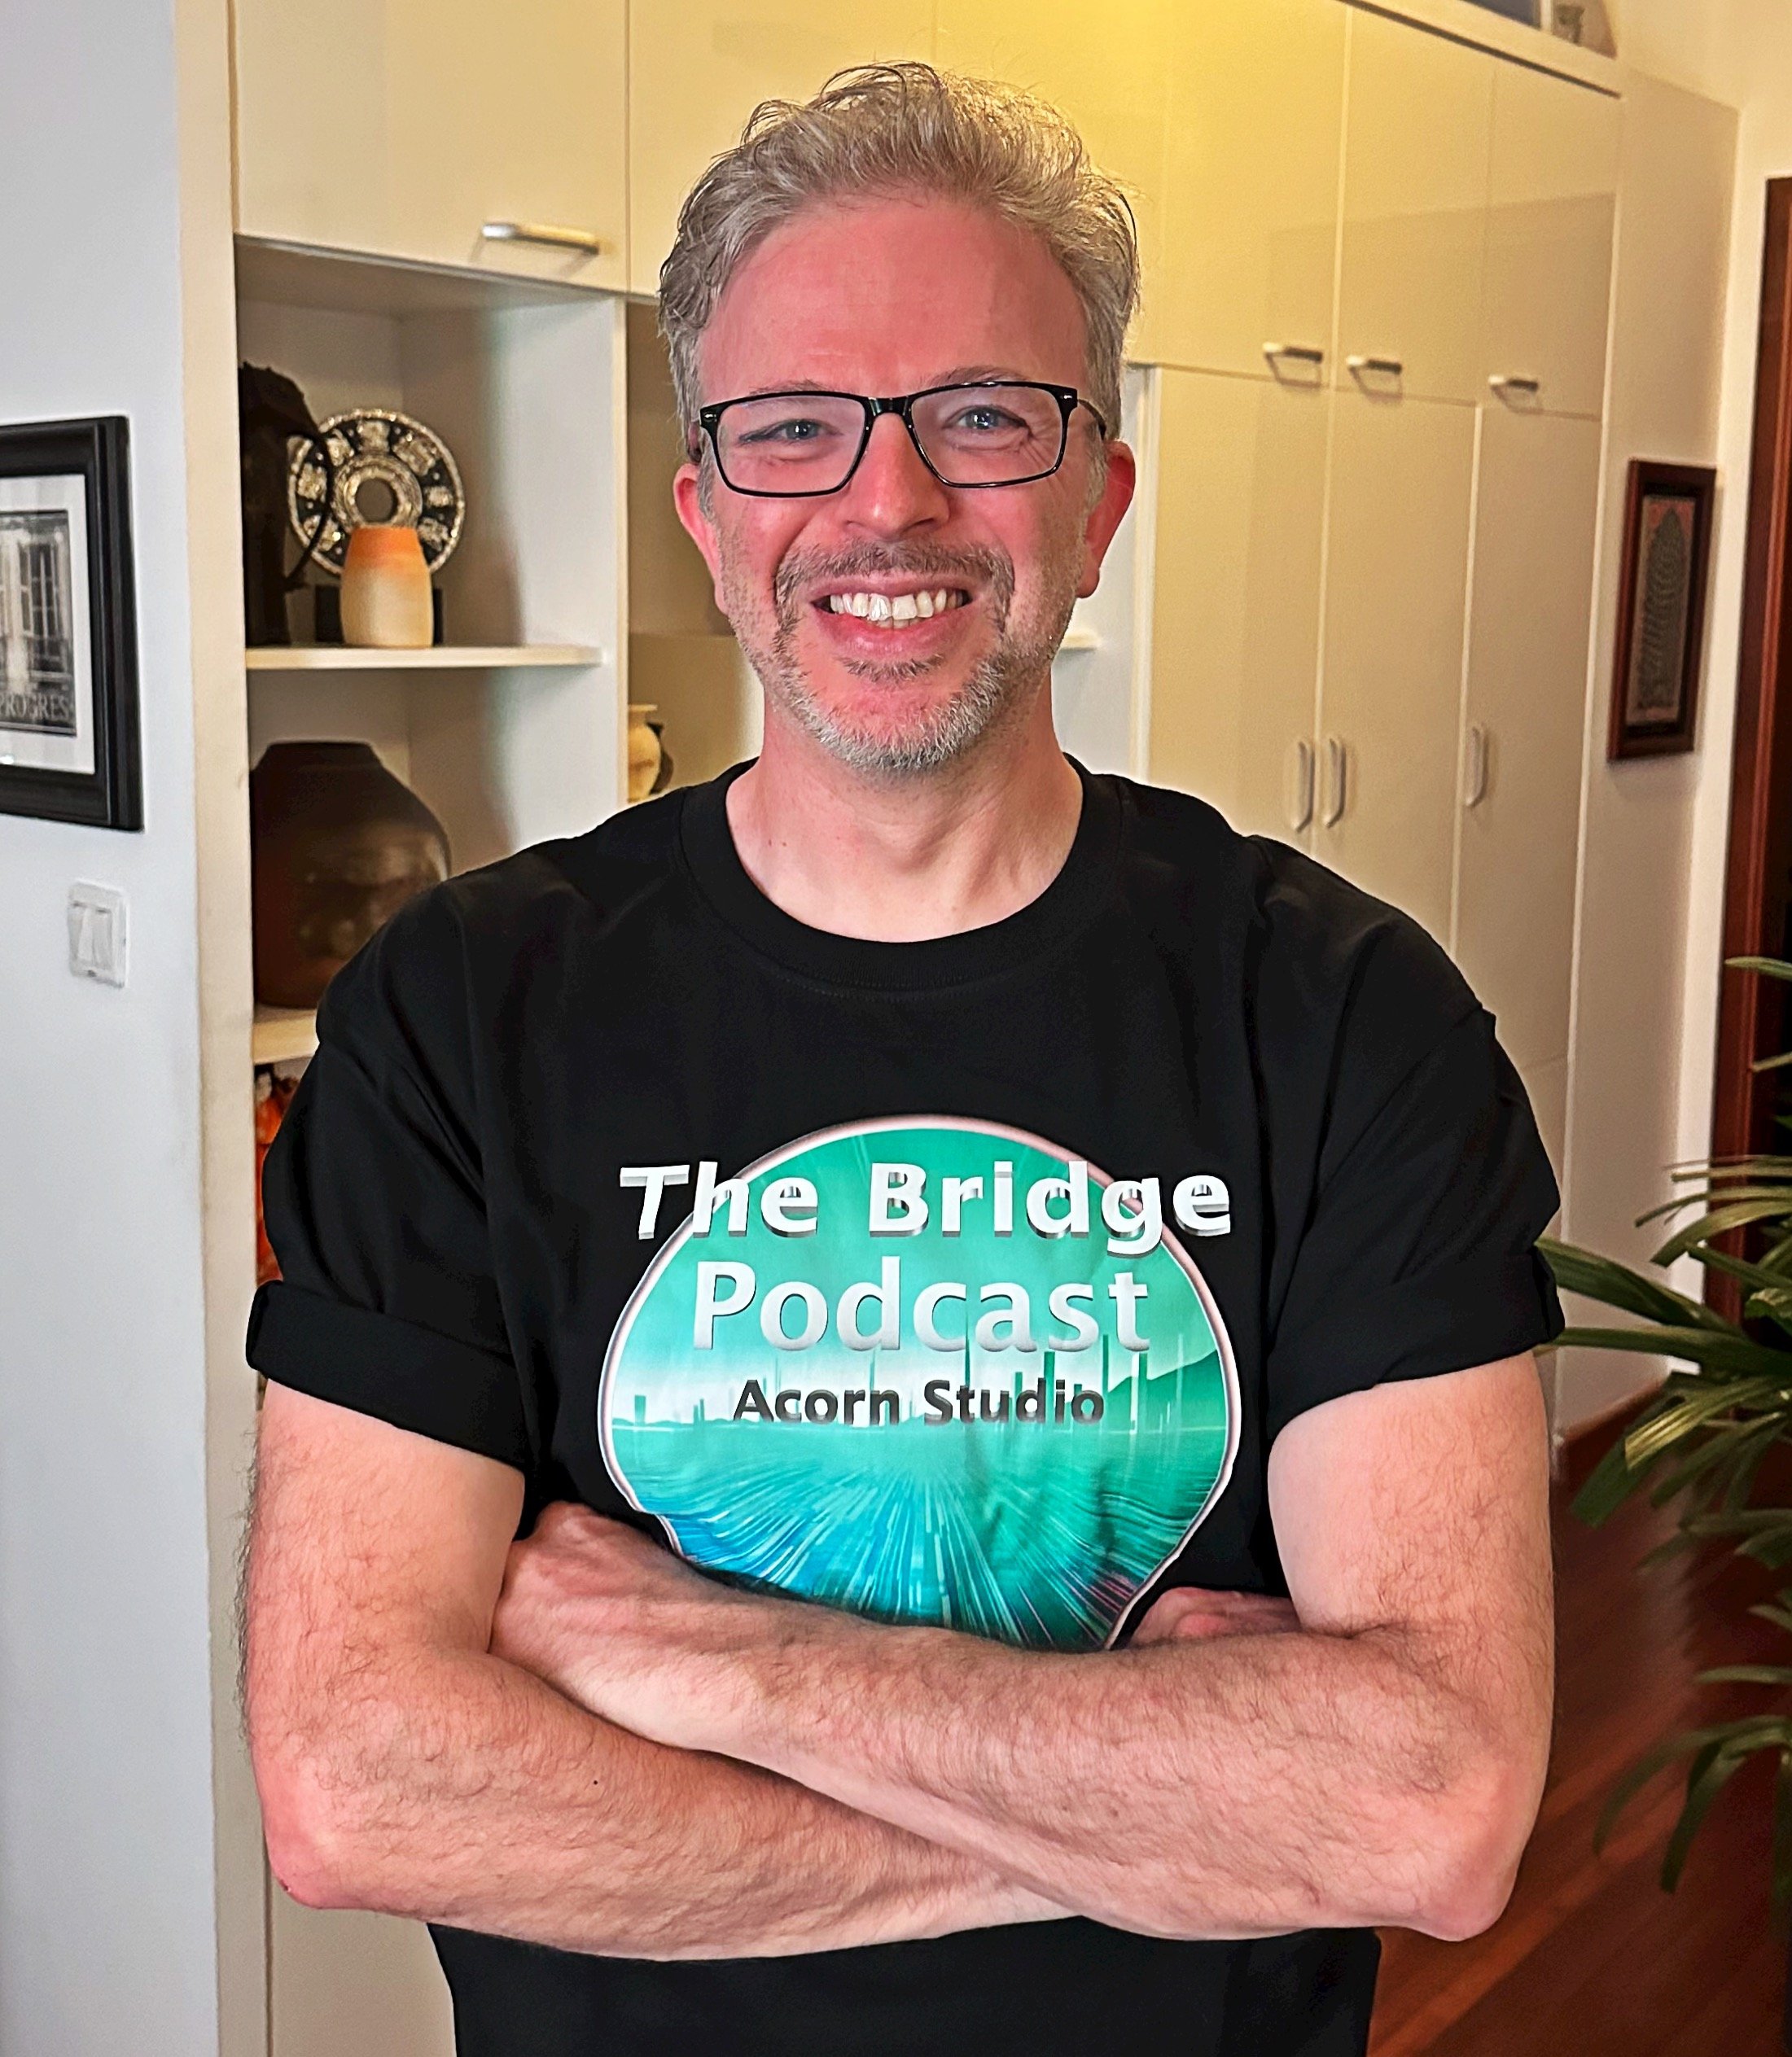 A photo of Oscar posing in some excellent merch from The Bridge.